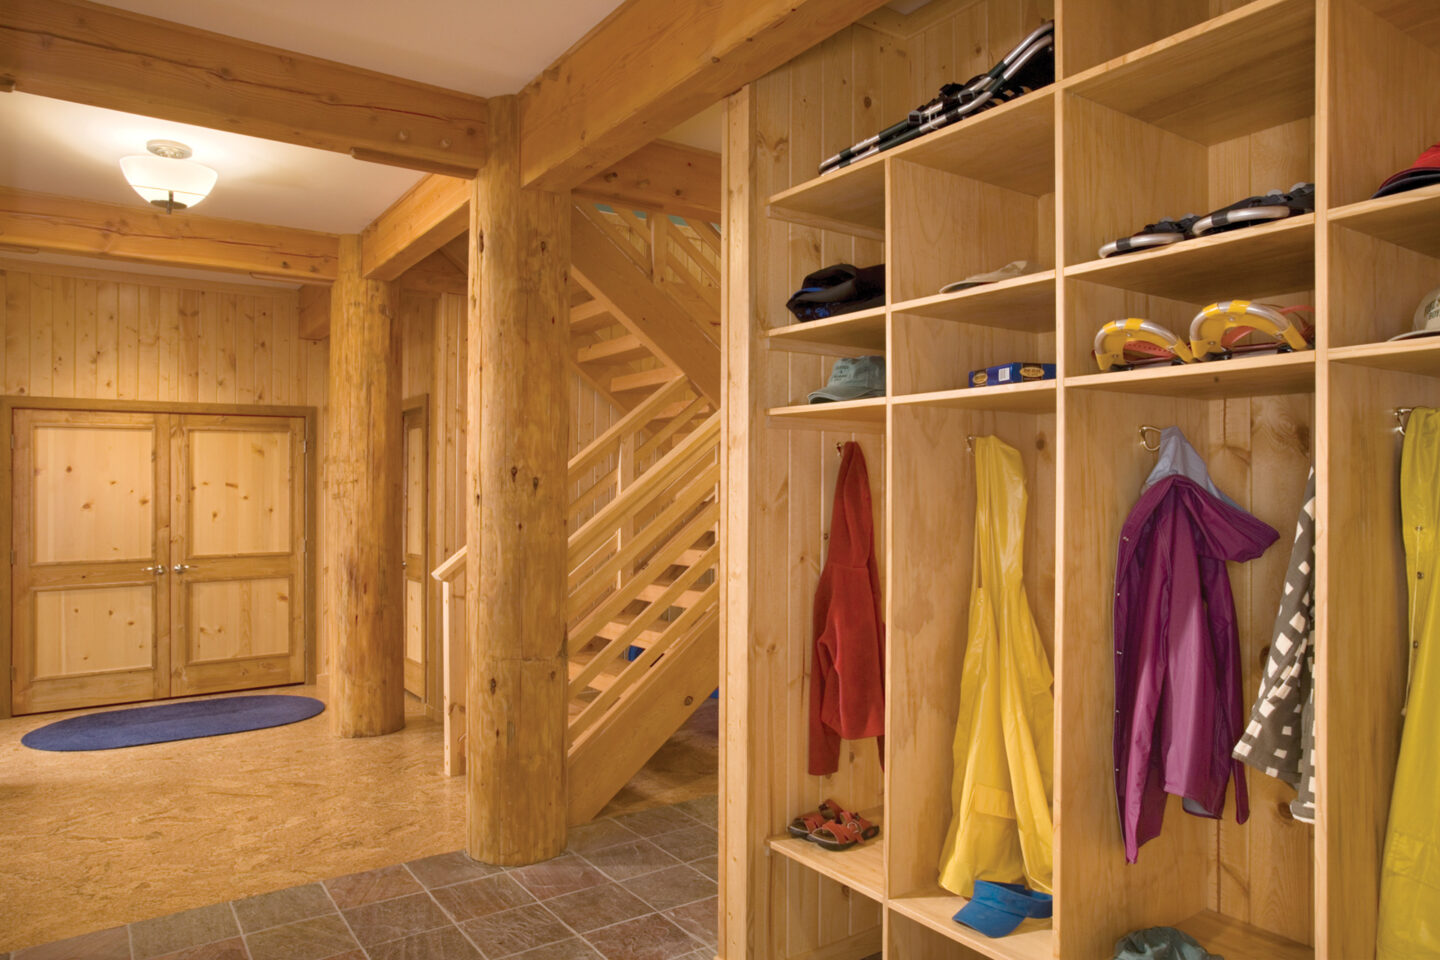 A secondary entry and a mudroom that provides storage for coats, shoes, and sports gear help keep the main areas of a home clean.